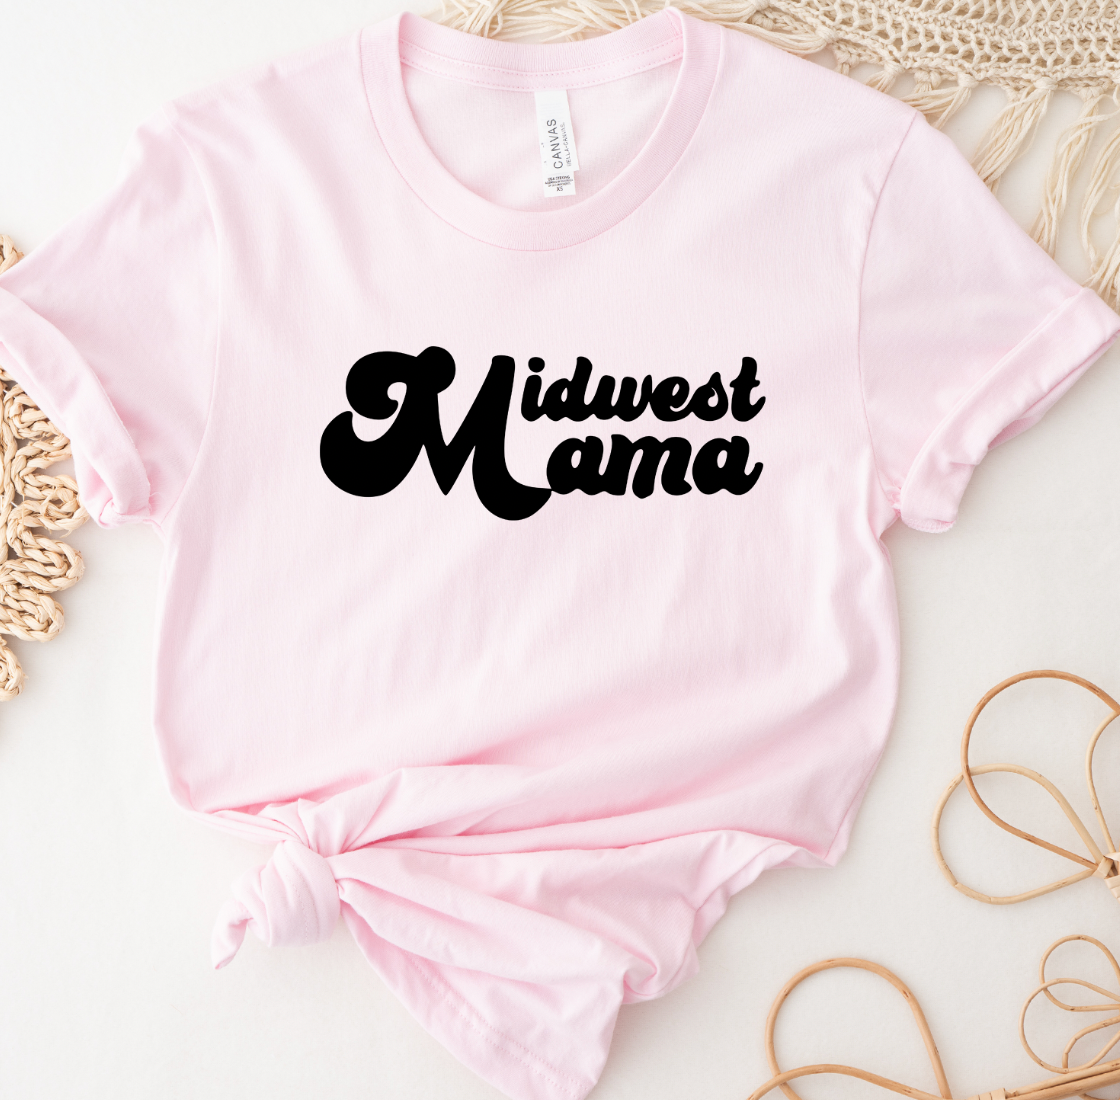 Midwest Mama T-Shirt (XS-4XL) - Multiple Colors!